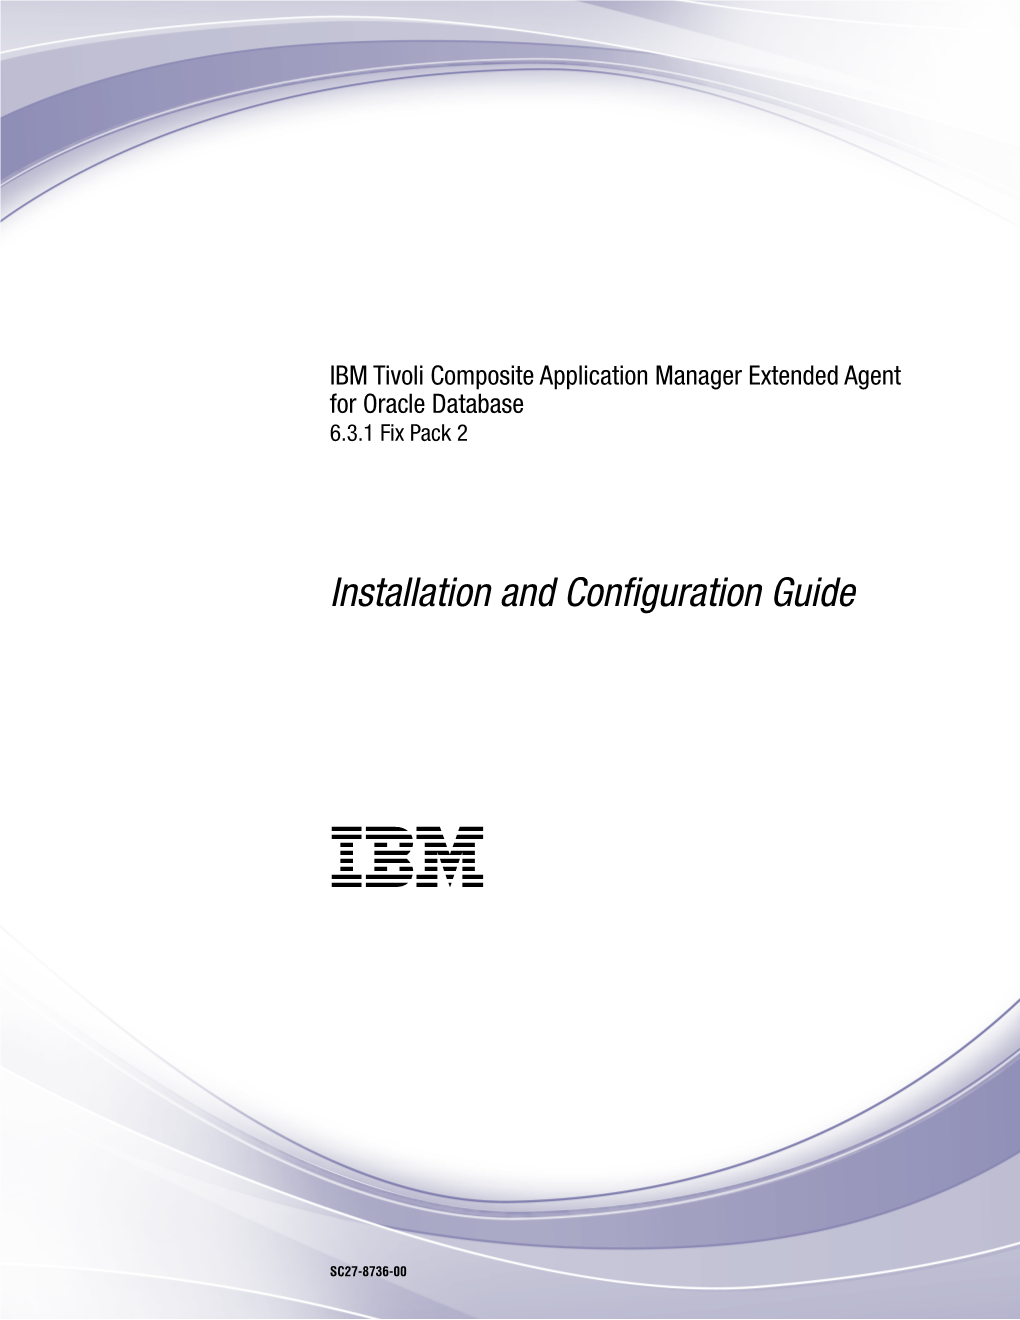 ITCAM Extended Agent for Oracle Database Installation and Configuration Guide Figures